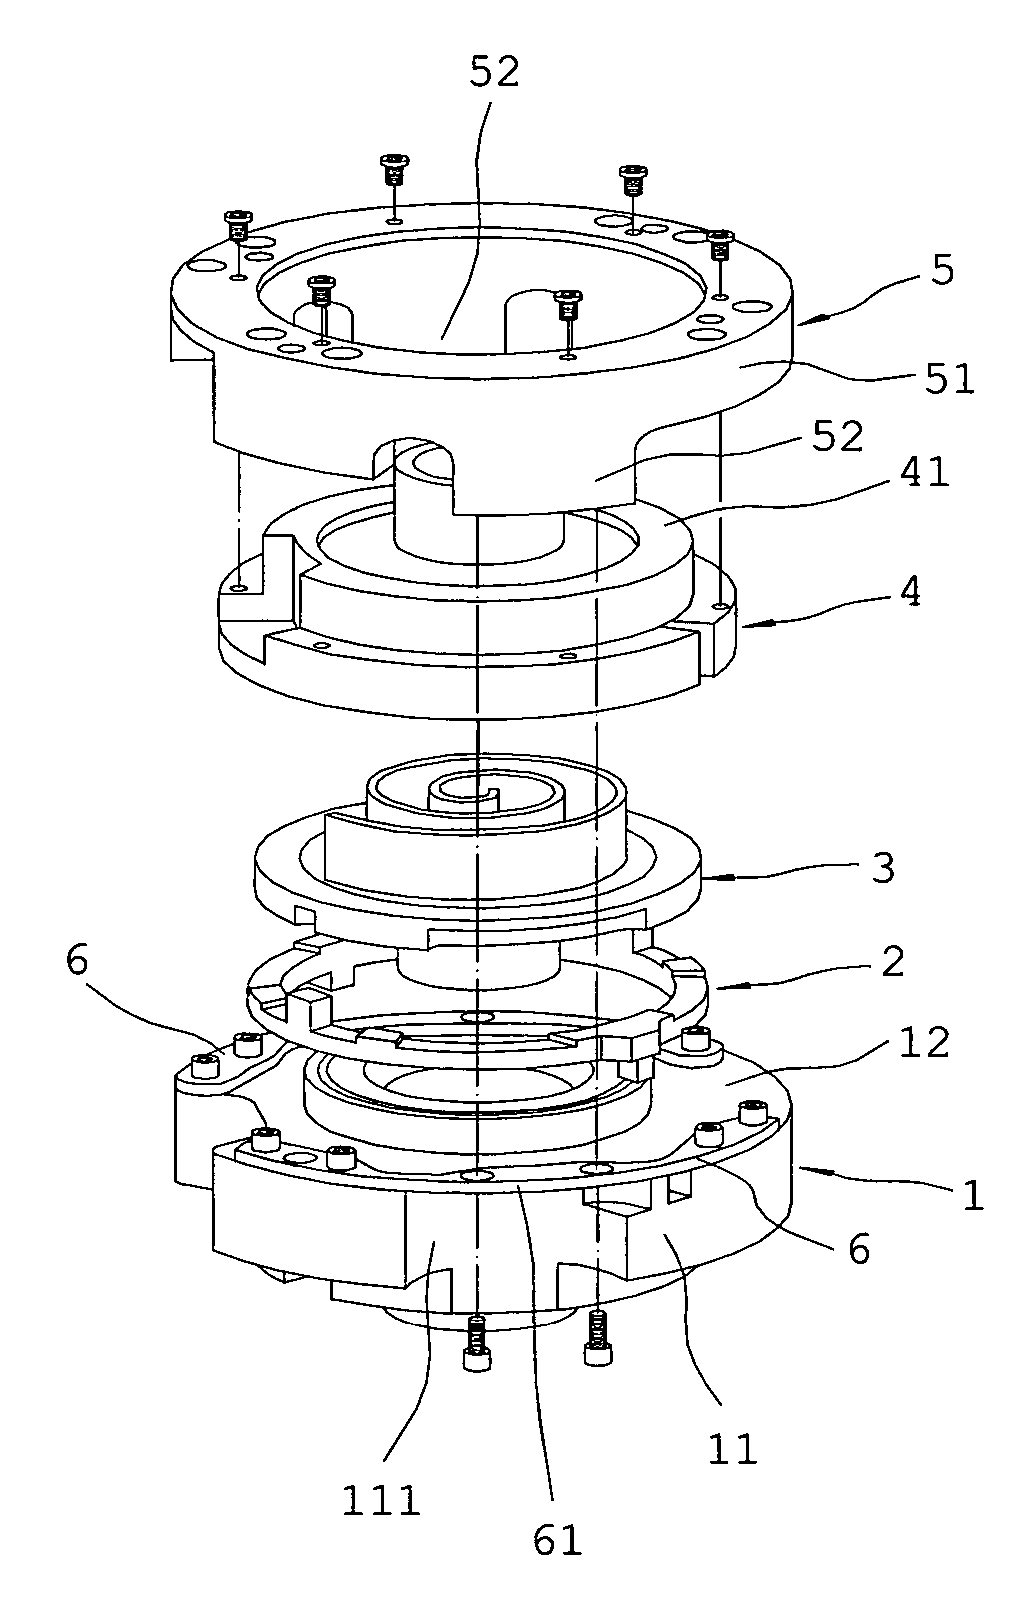 Scroll apparatus with an axial gap control function